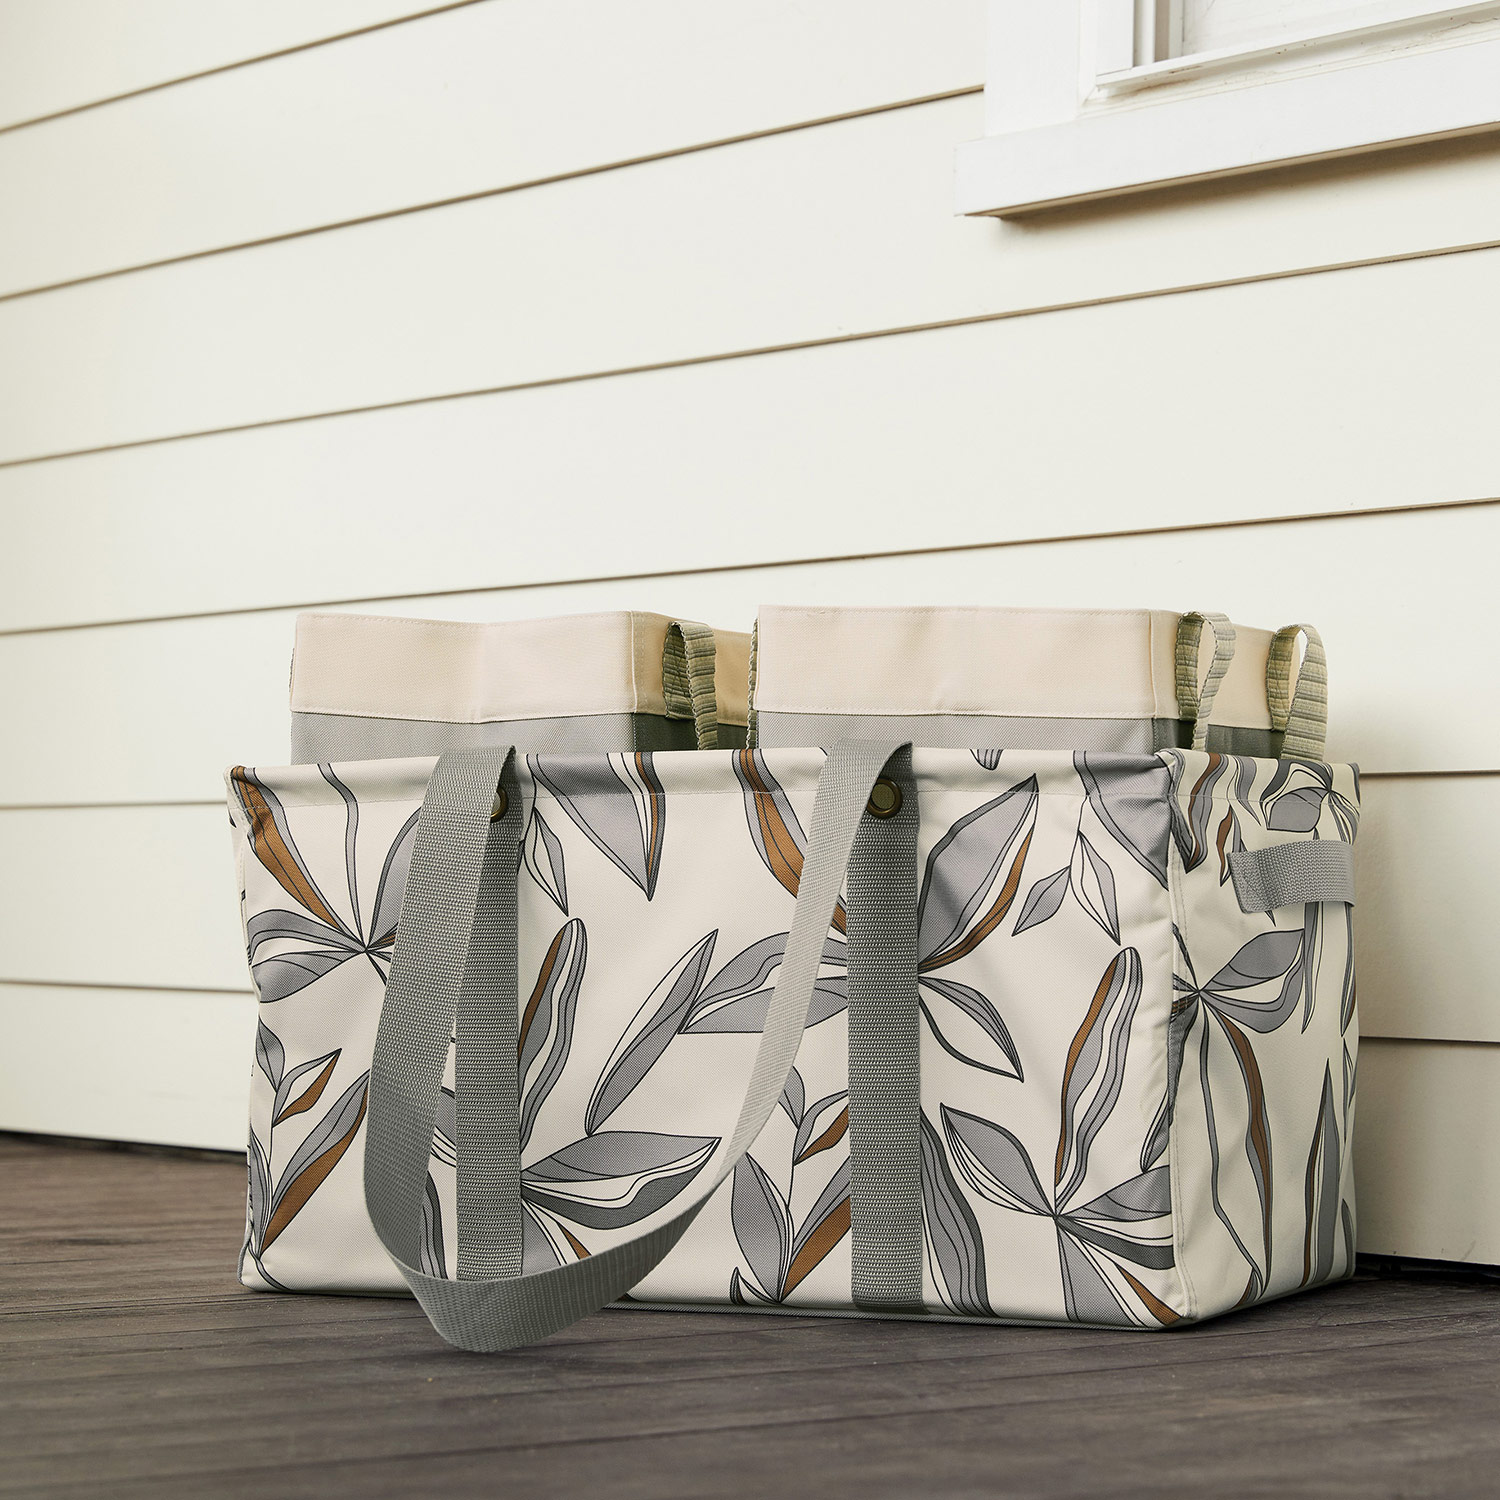 New! Deluxe Utility Tote LTD from Thirty-One